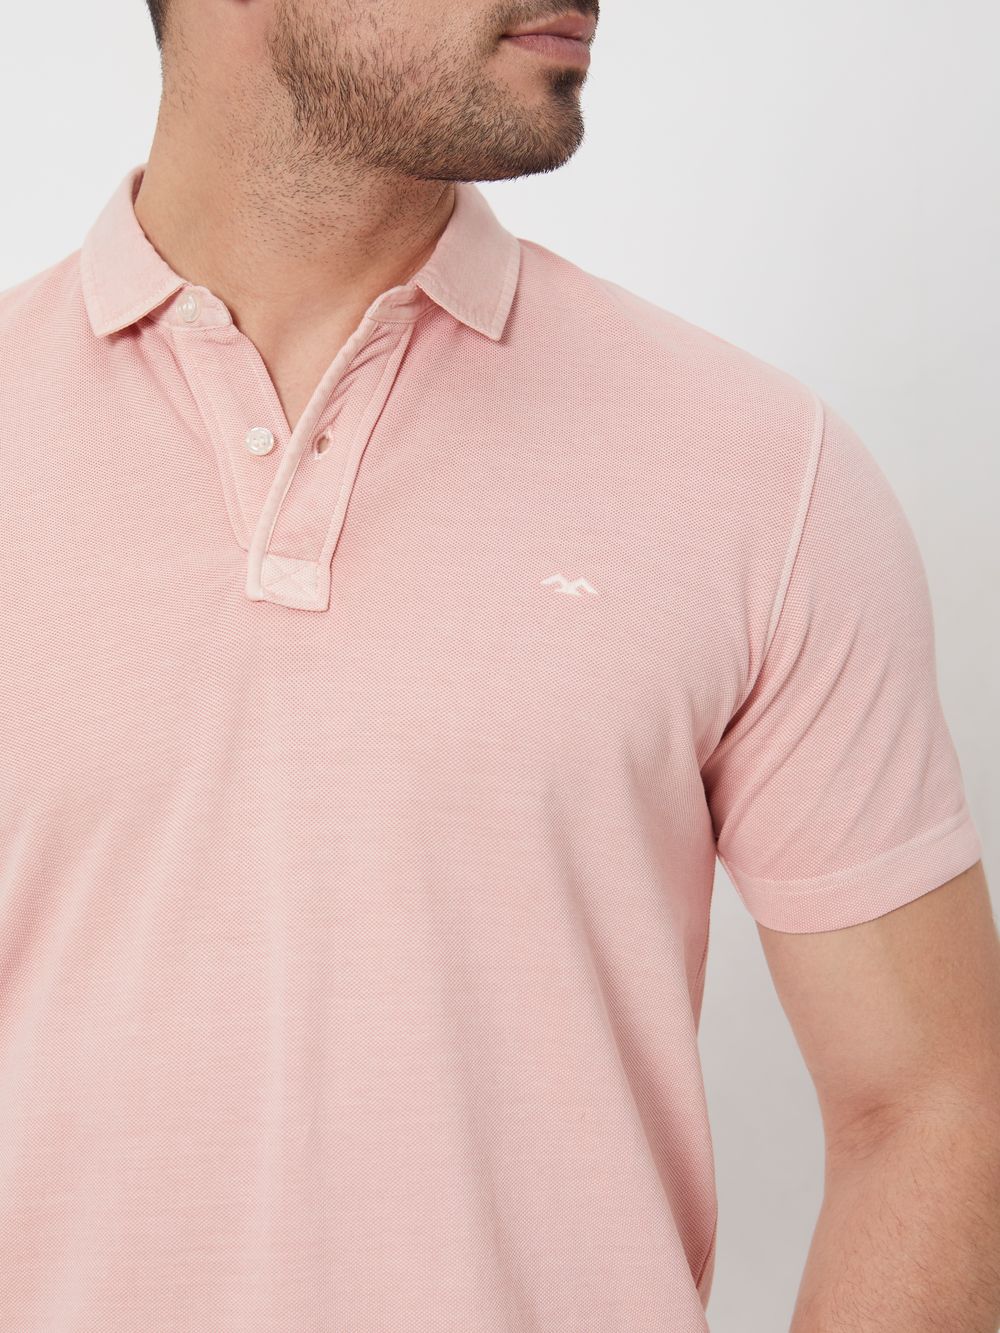 Pink Logo Embroidered Plain Slim Fit Pique Polo T-Shirt